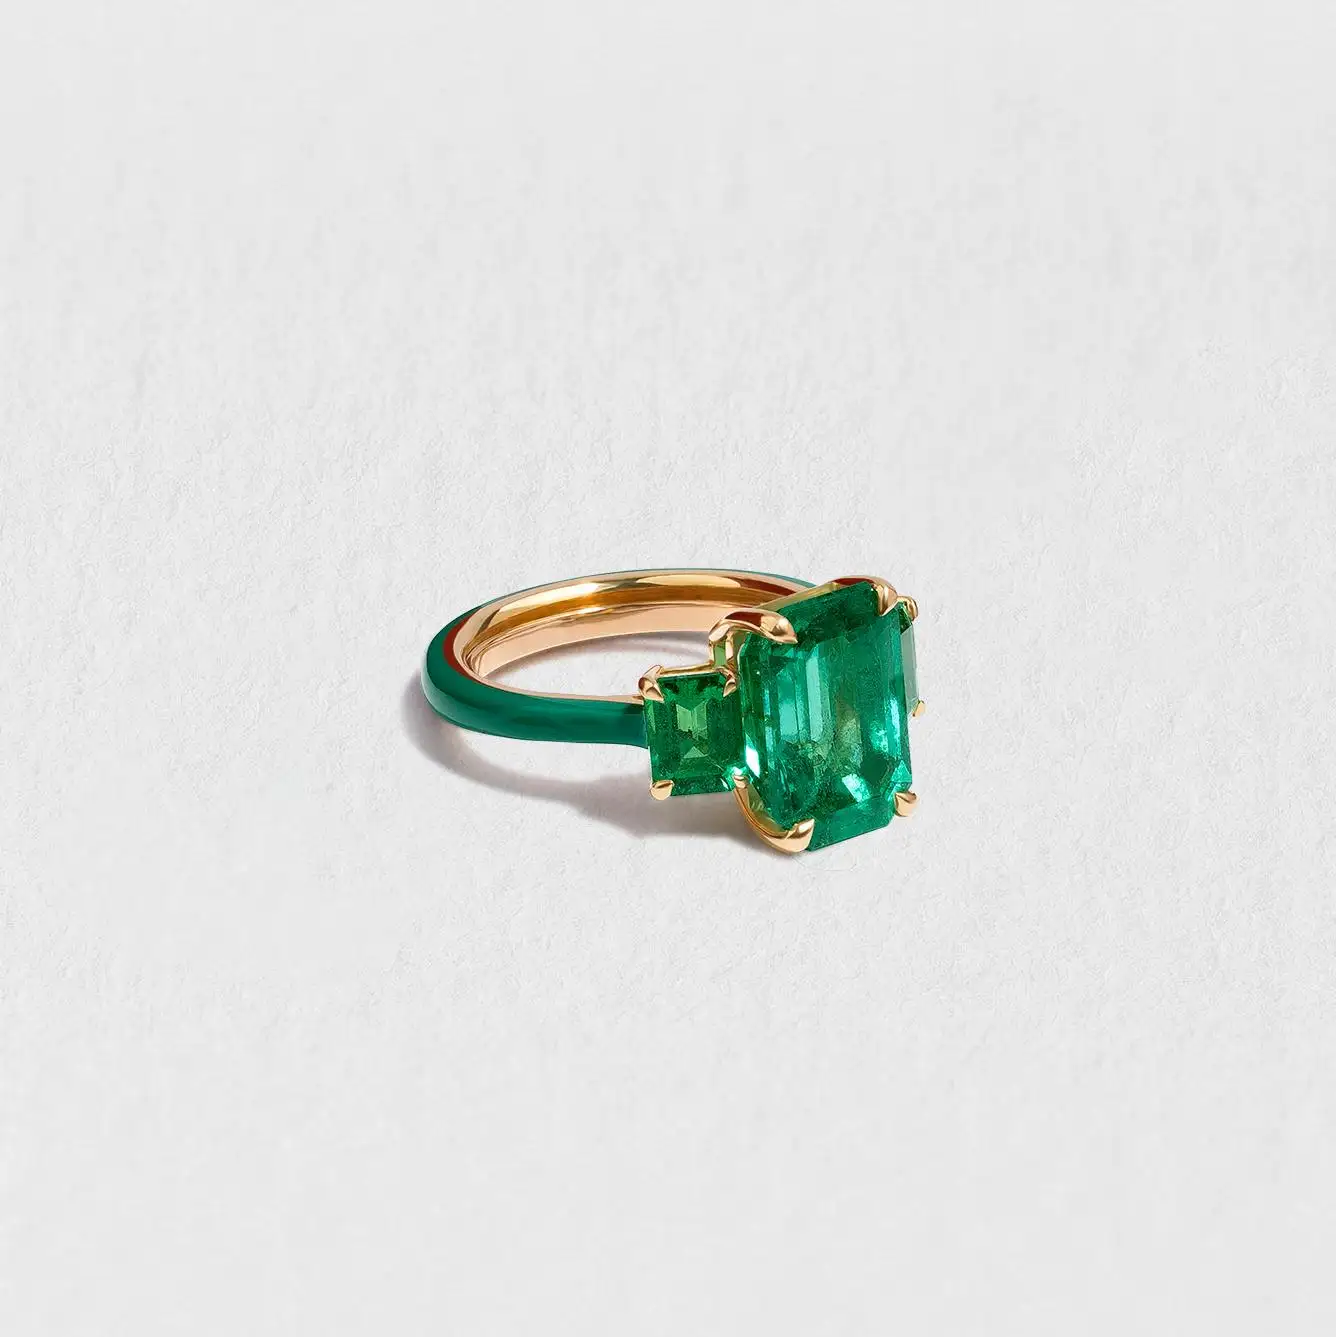 5.29-Carats-Emerald-Ring-in-Yellow-Gold-with-Ceramic-Detail-11.webp